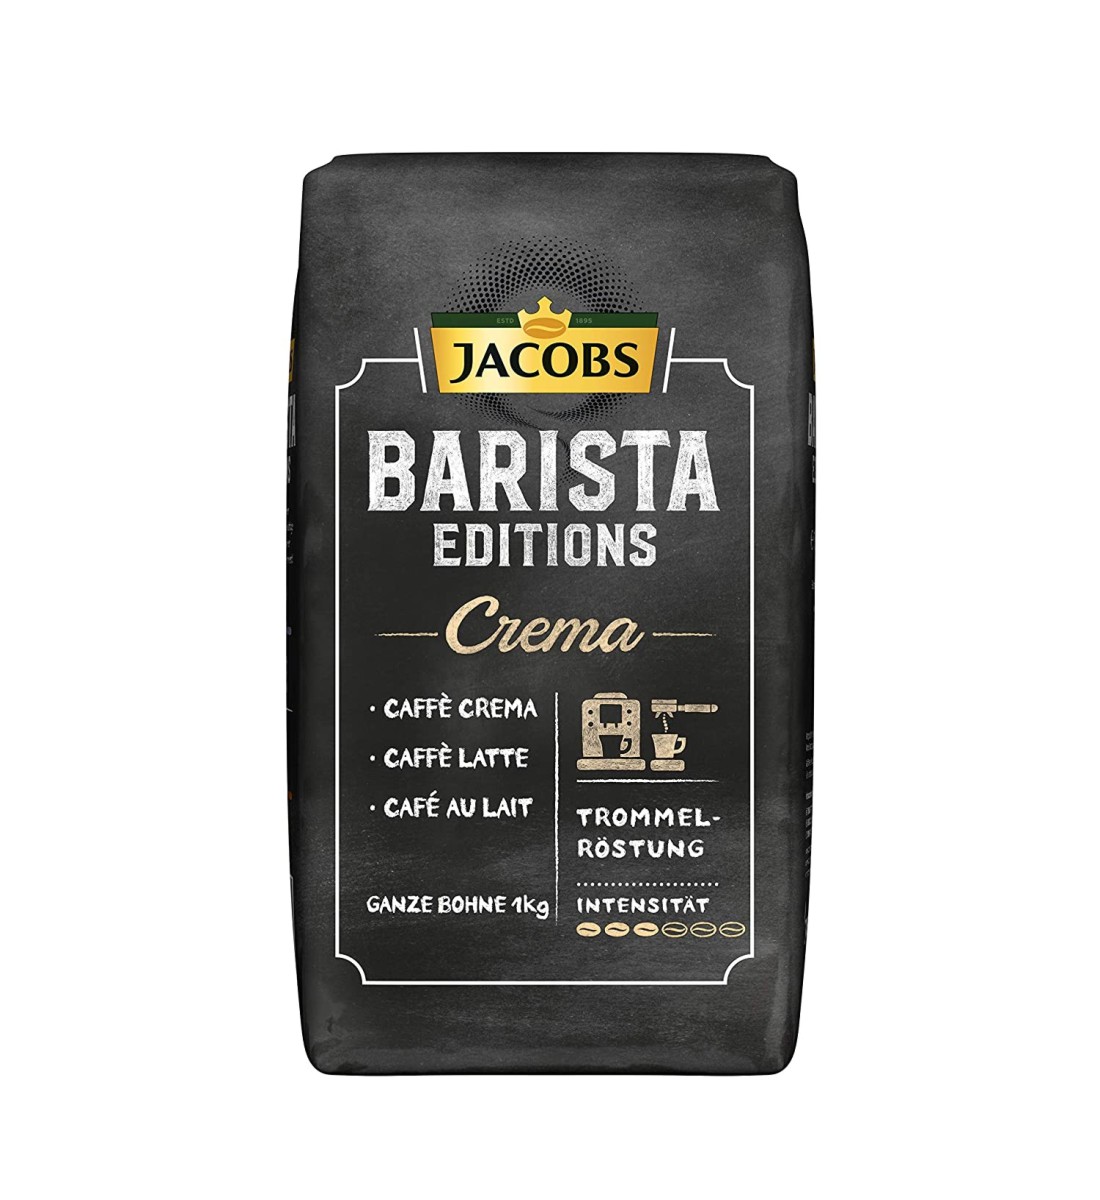 Jacobs Barista Editions Crema cafea boabe 1 kg